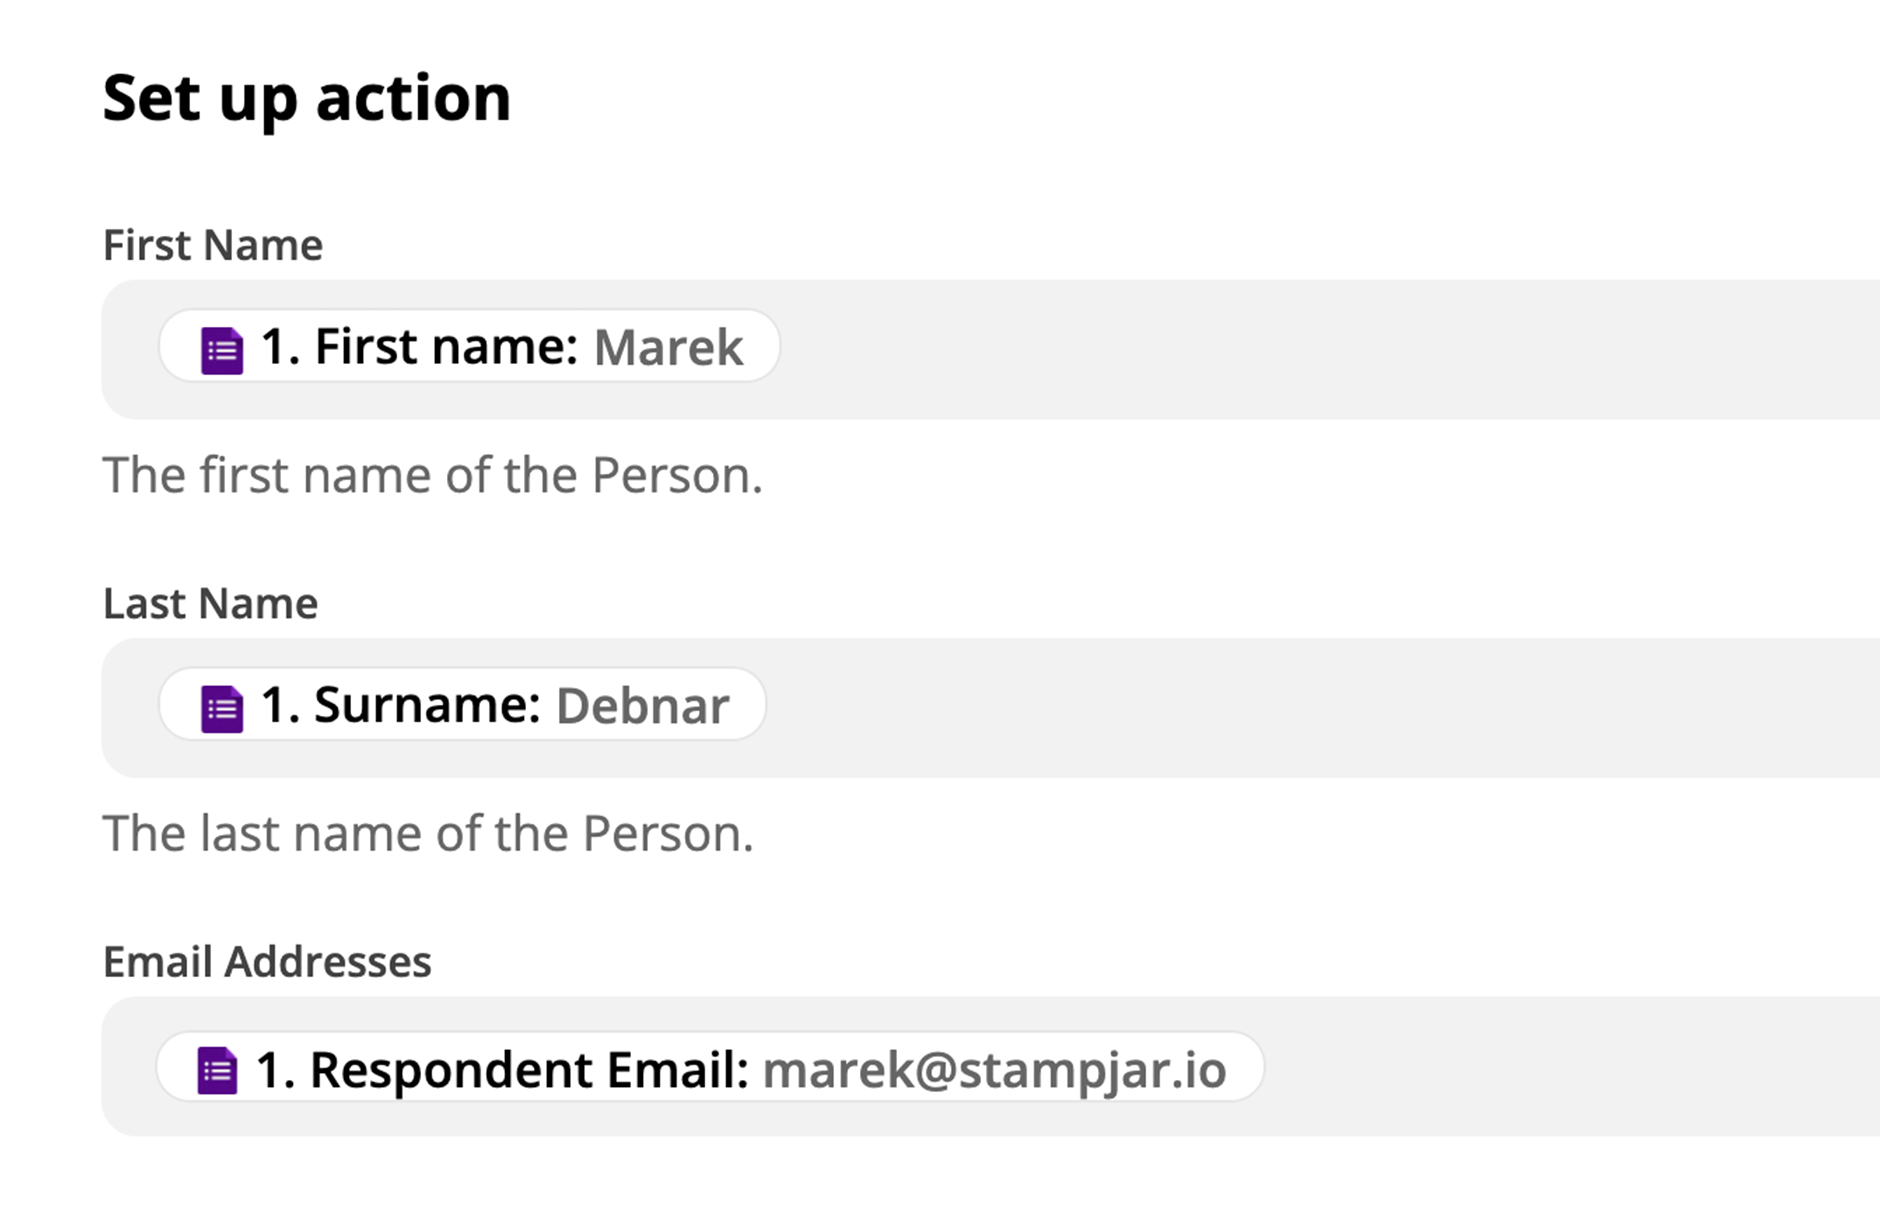 An action step in Zapier is configured to collect name and email address values using data from step 1